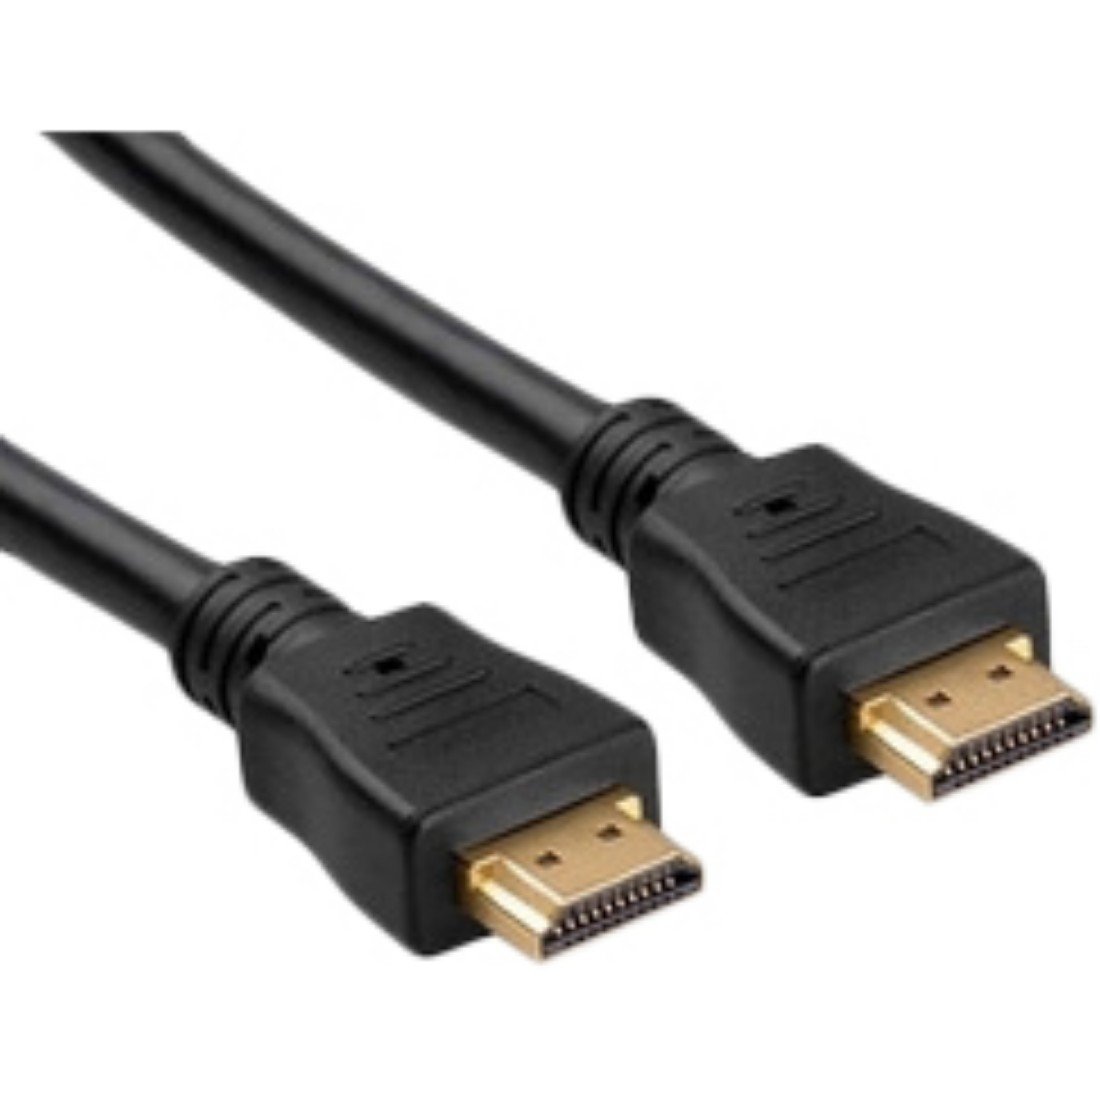 HDMI TO HDMI CABLE 16FT 4K BLK 10.2GBPS